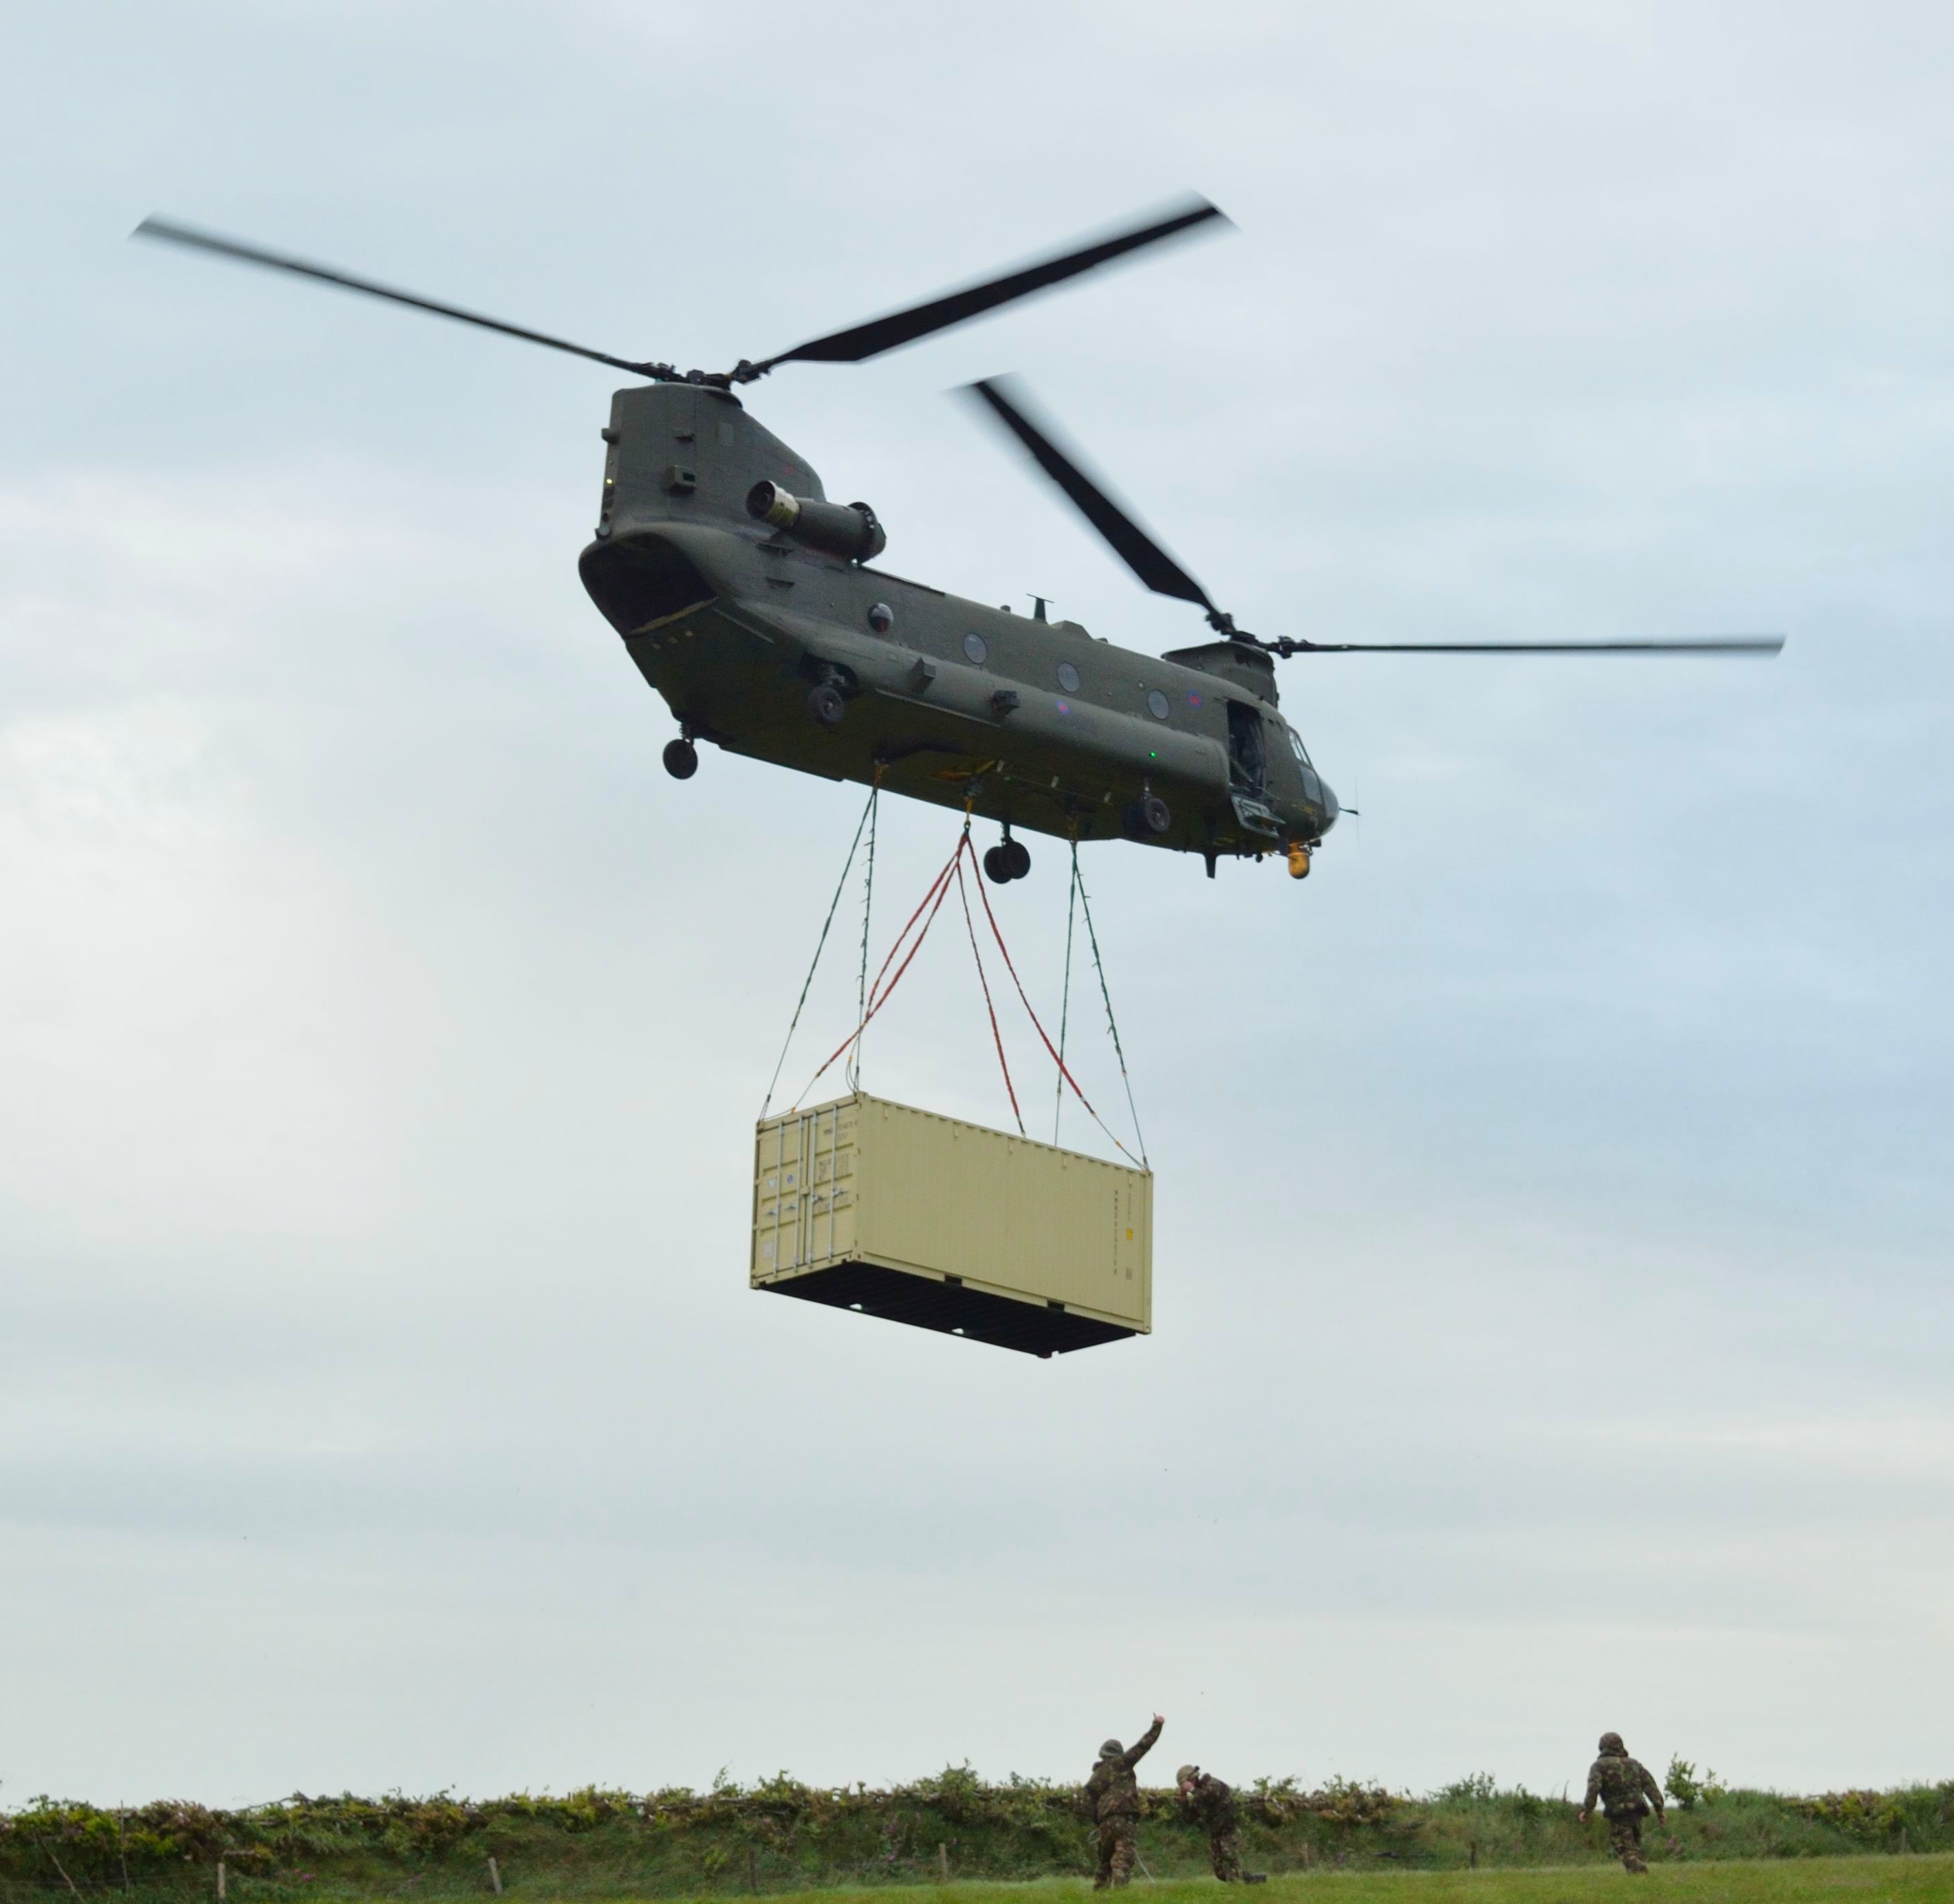 chinook-carrying-container-dsc_1500c1-c2a92012-faye-balmond.jpg